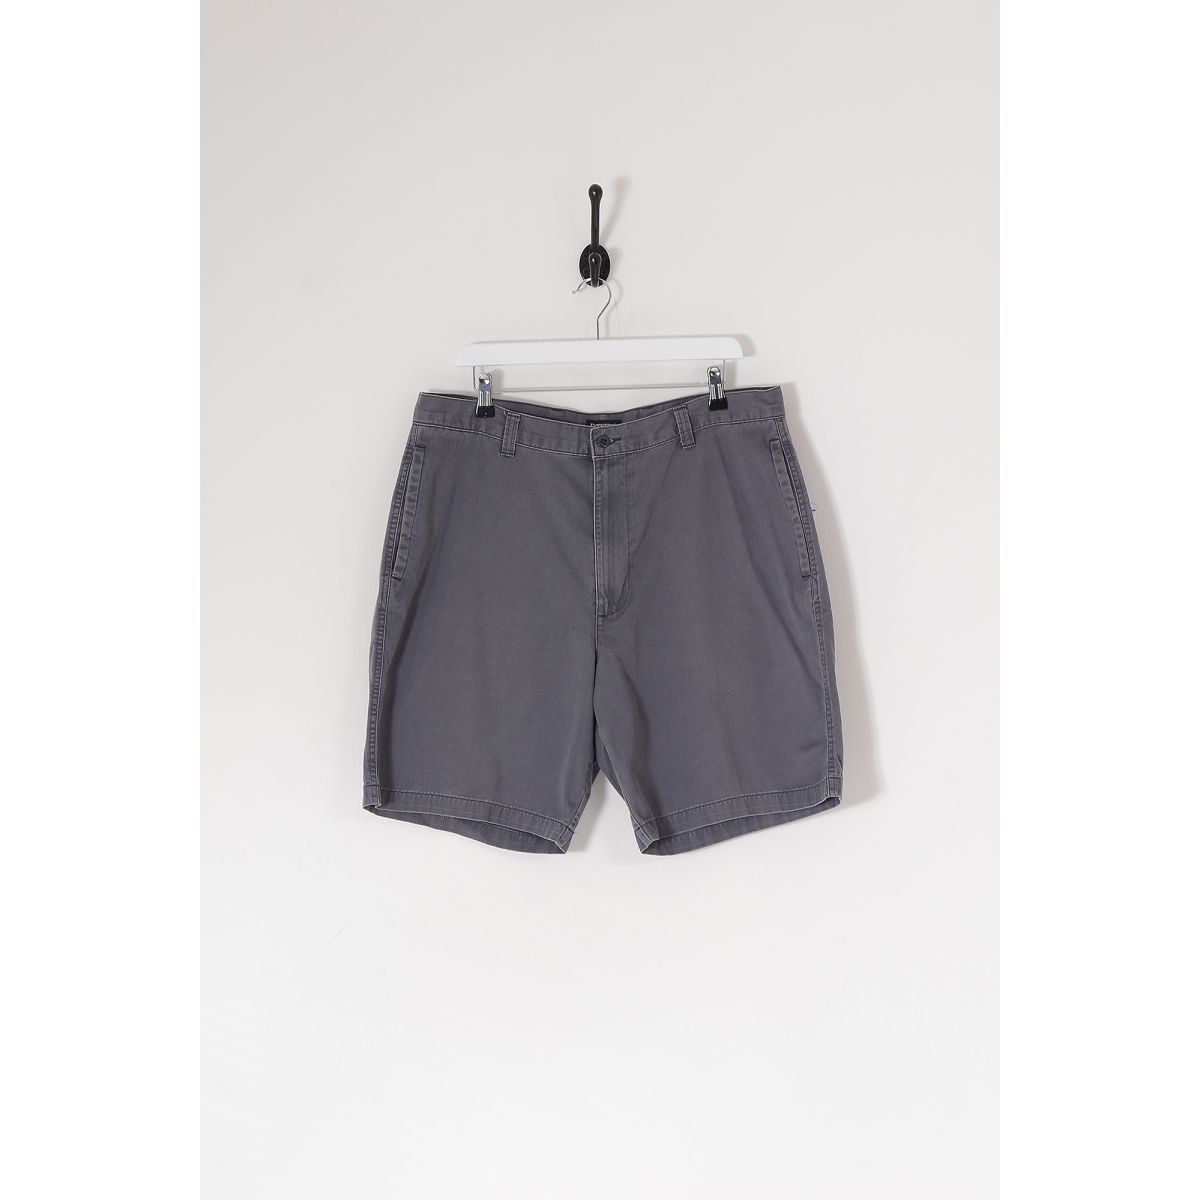 Vintage DOCKERS Chino Shorts Charcoal W36